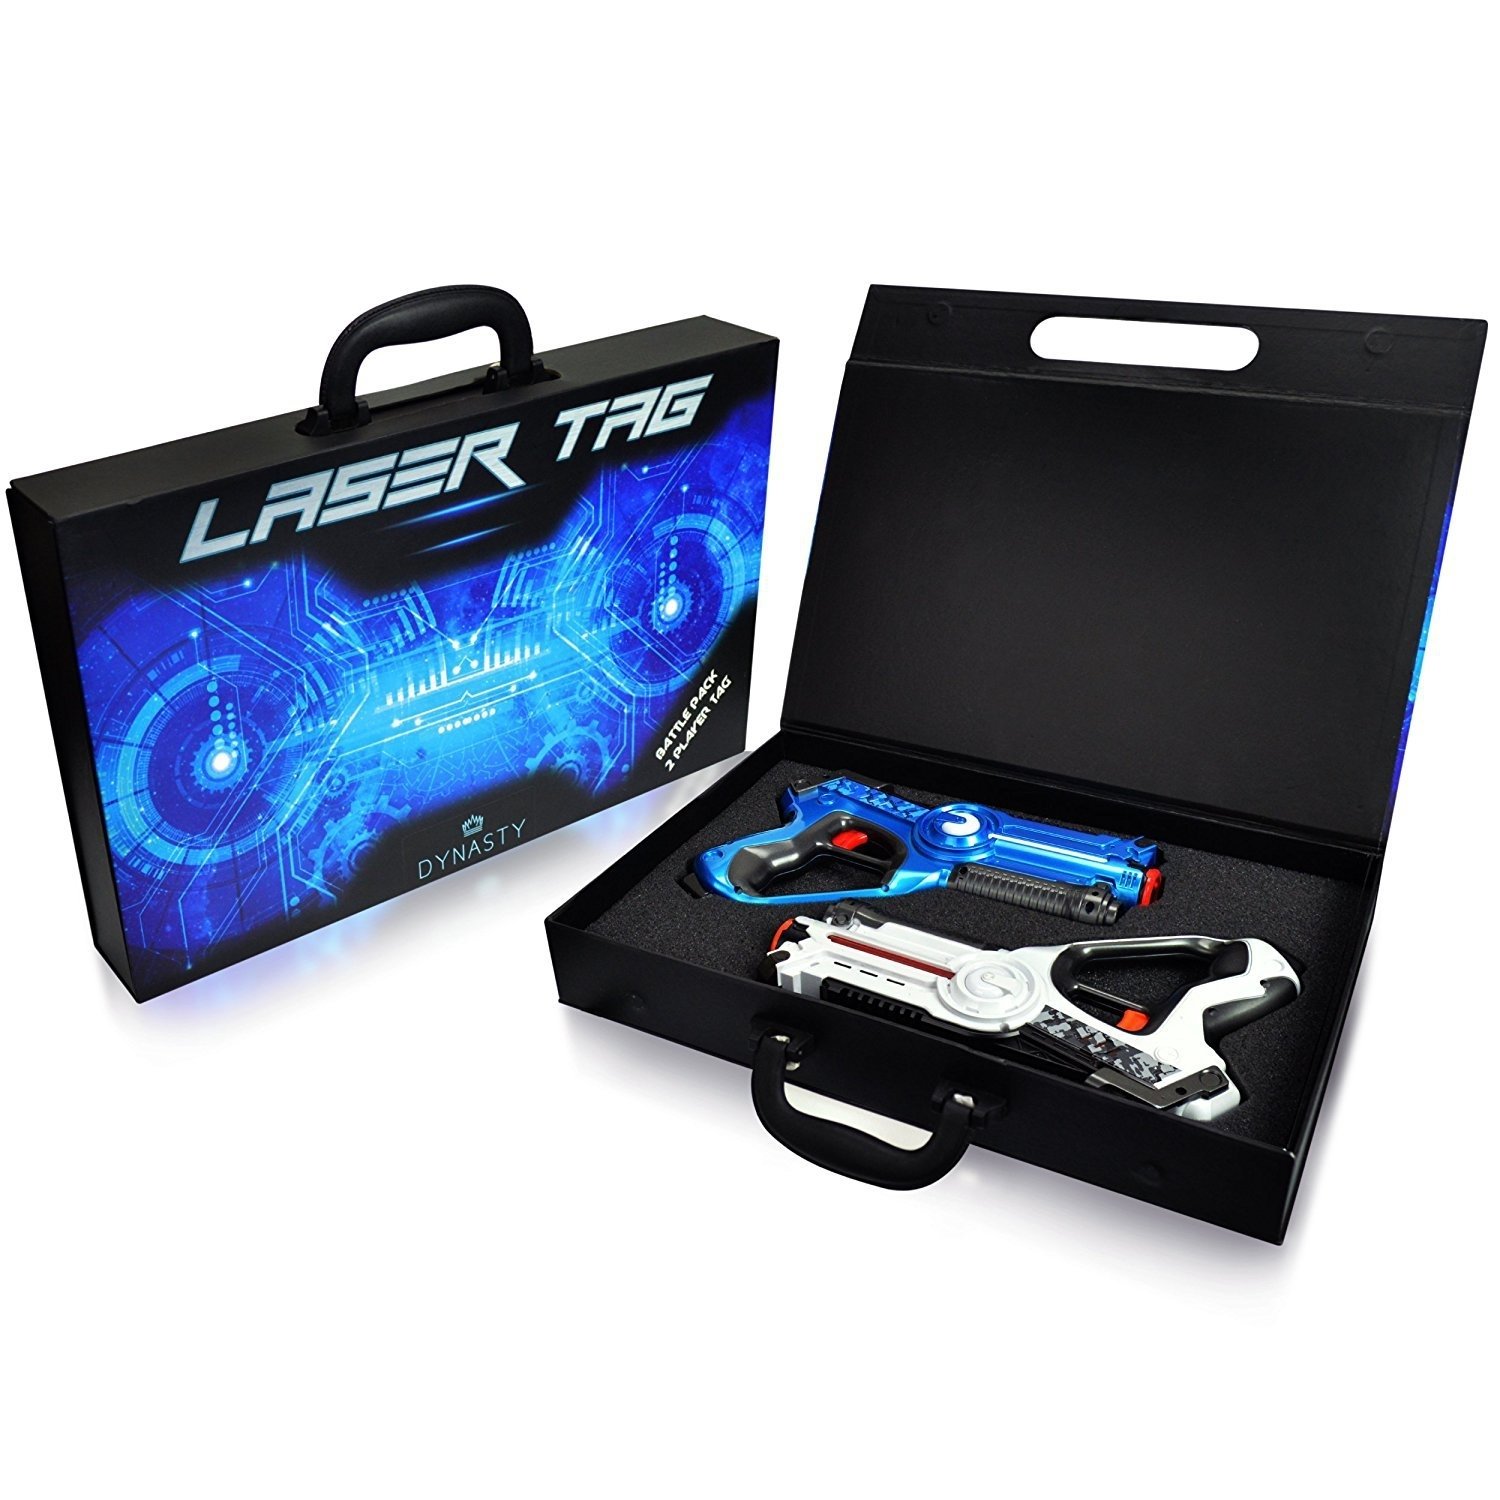 10 Most Popular 11 Year Old Boy Christmas Gift Ideas awesome gift ideas for an 11 year old boy lazer tag tween and 2022